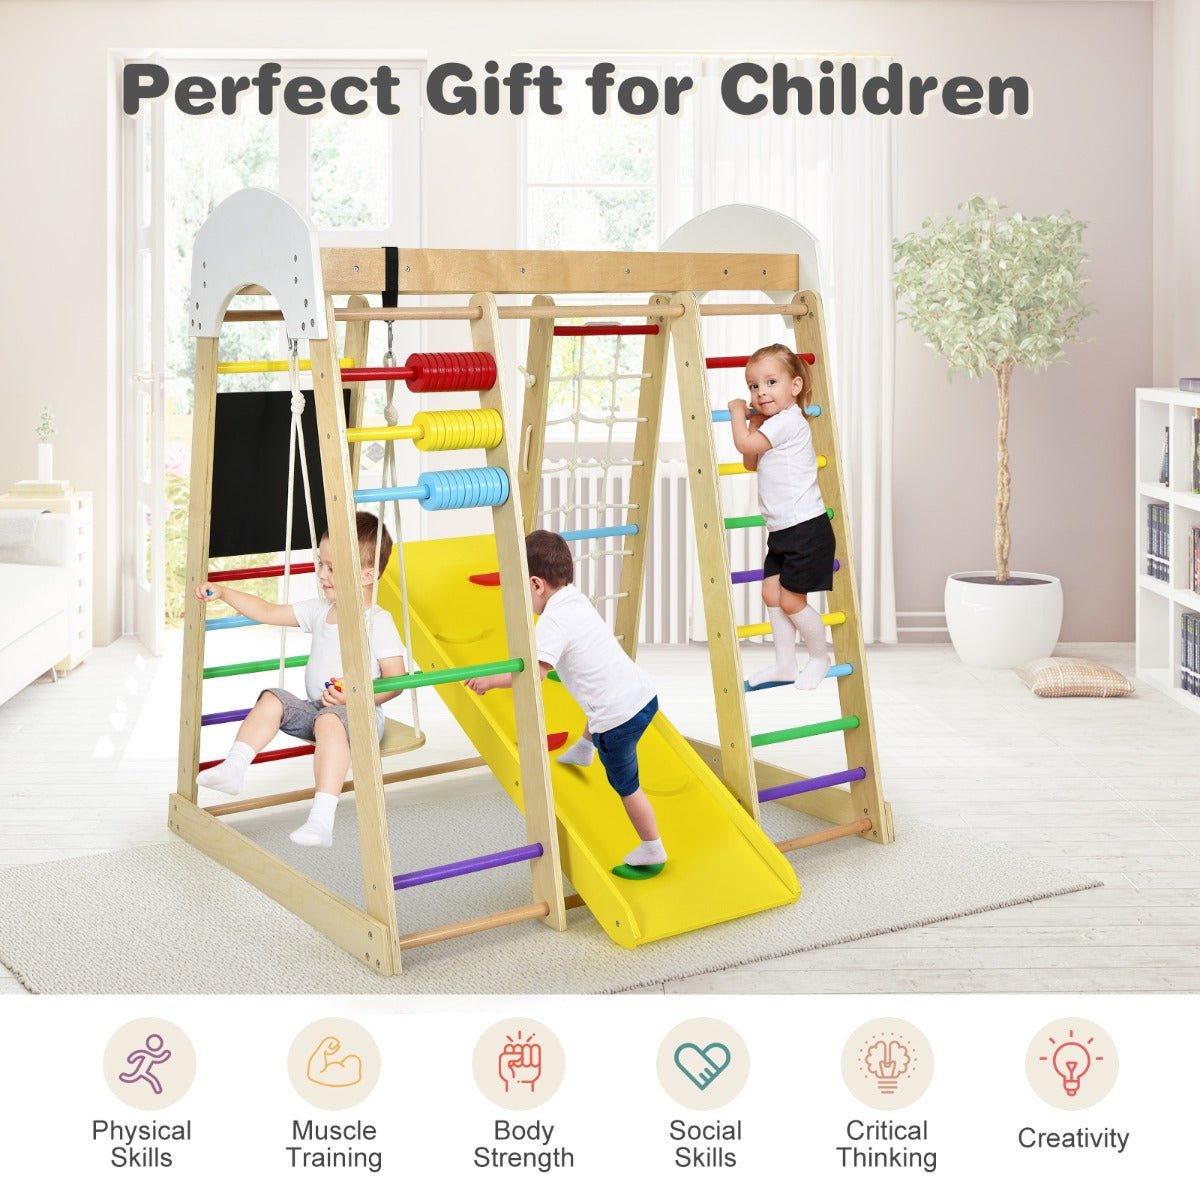 Discover Adventure with the Multicolor Climbing Playset